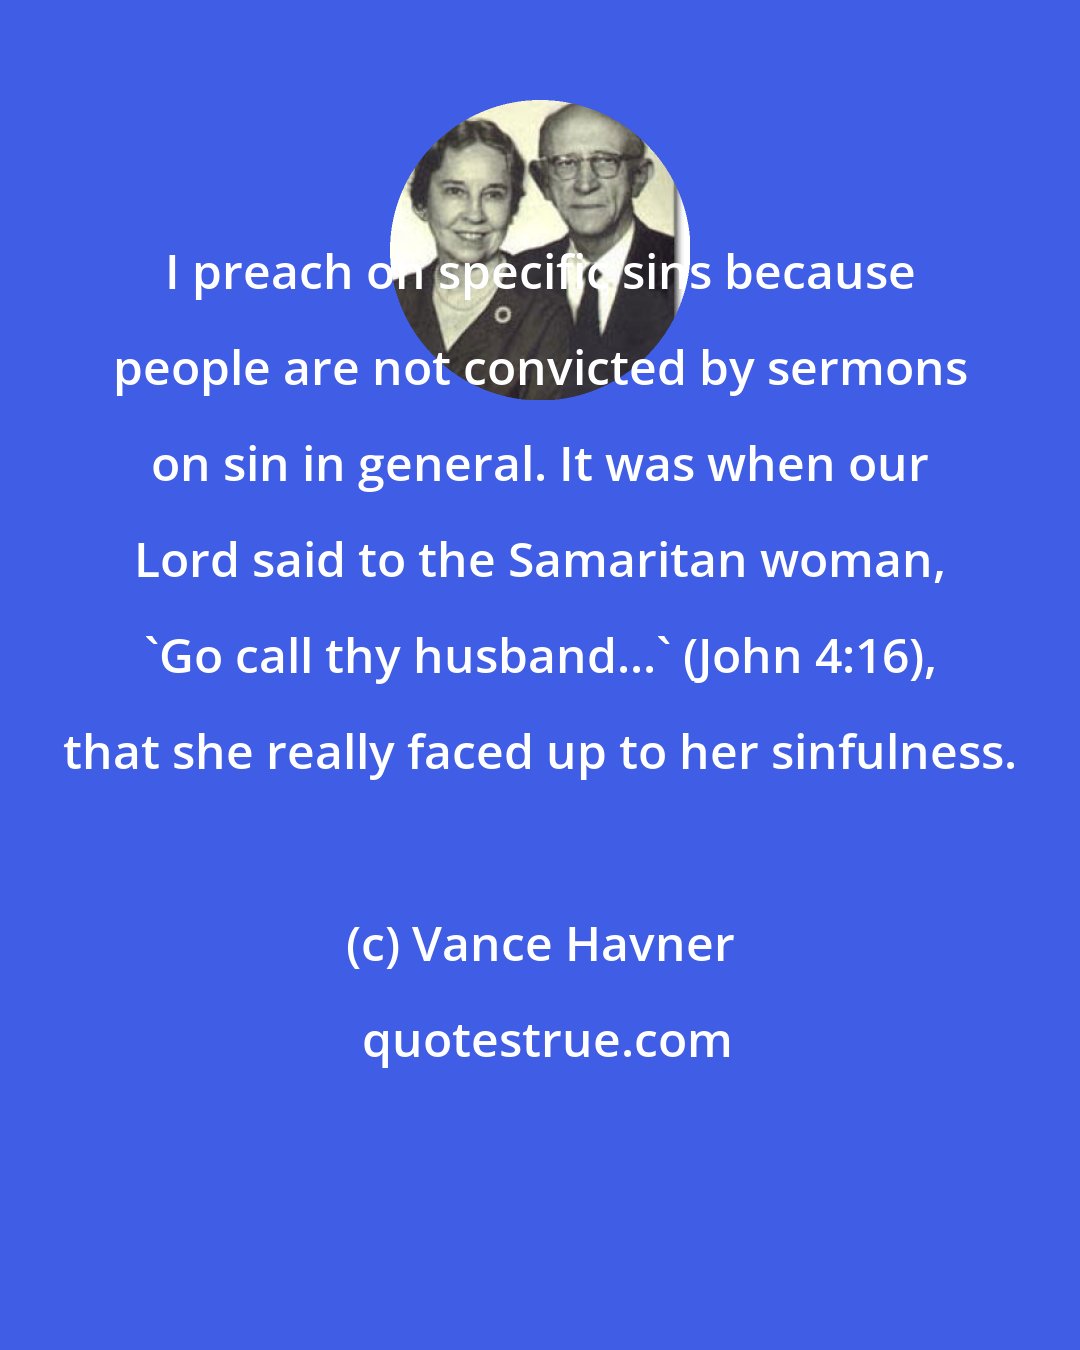 Vance Havner: I preach on specific sins because people are not convicted by sermons on sin in general. It was when our Lord said to the Samaritan woman, 'Go call thy husband...' (John 4:16), that she really faced up to her sinfulness.